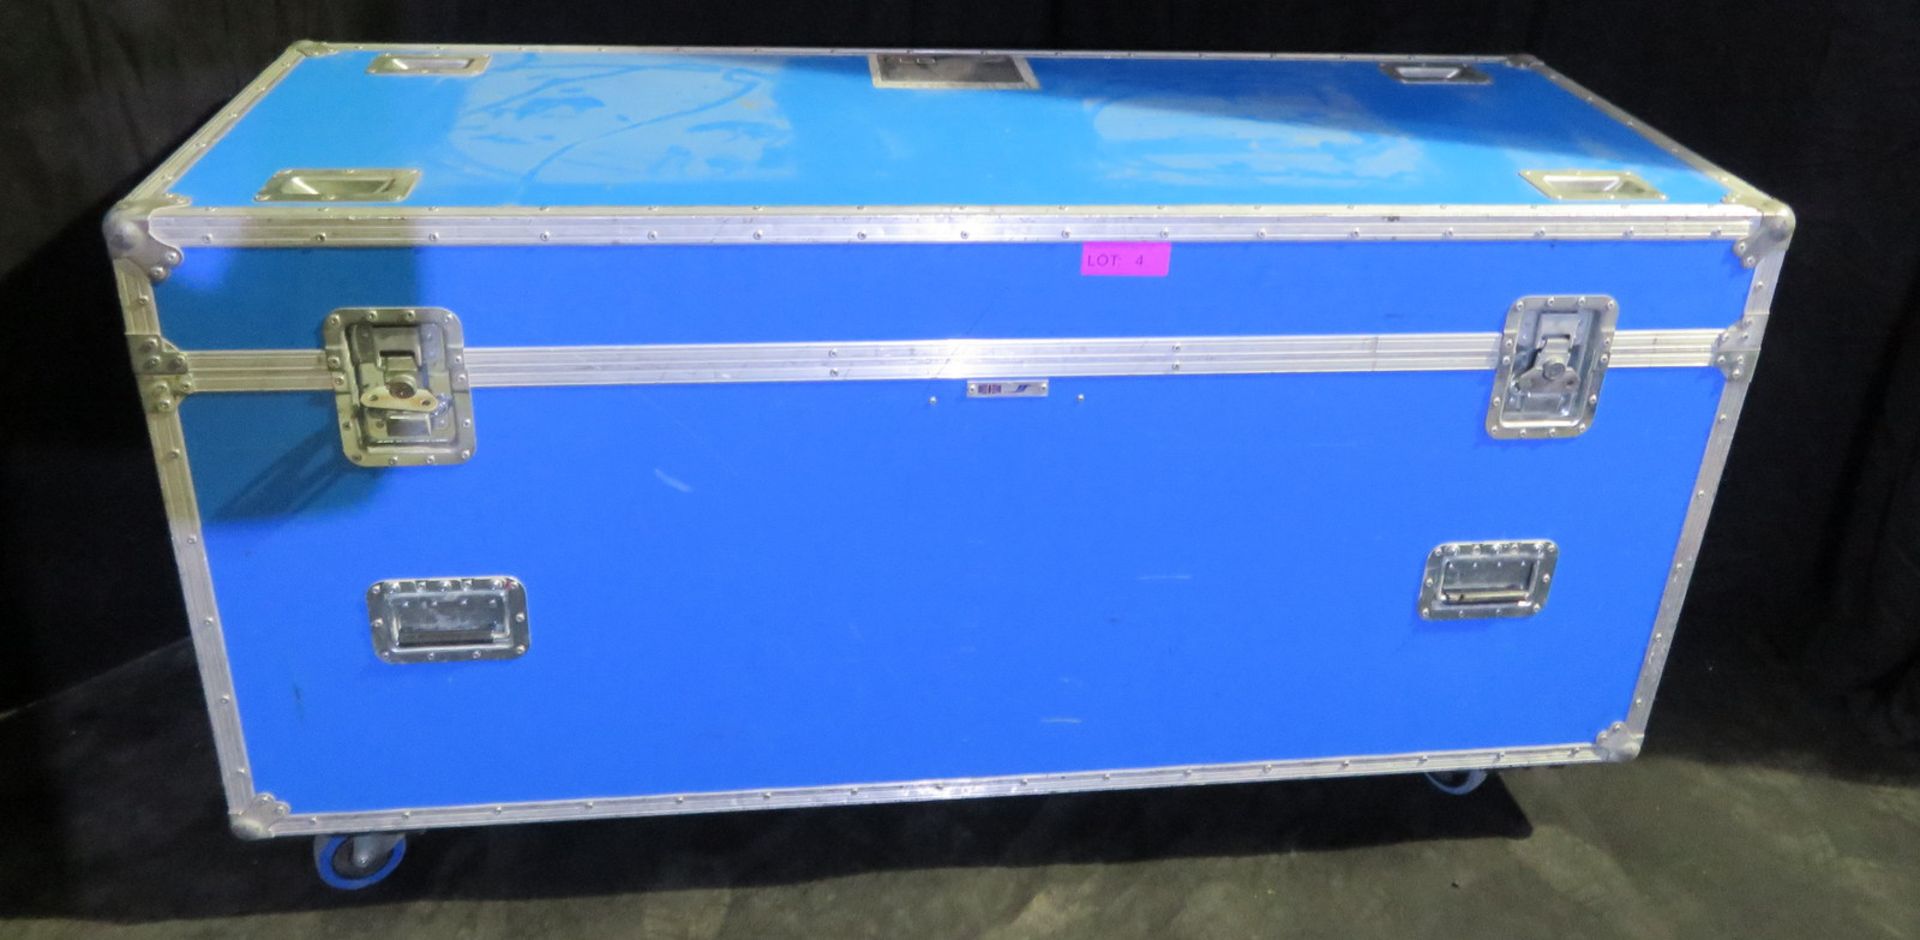 Pair of Clay Paky Alpha Spot HPE 1500 in twin flightcase - Image 12 of 12